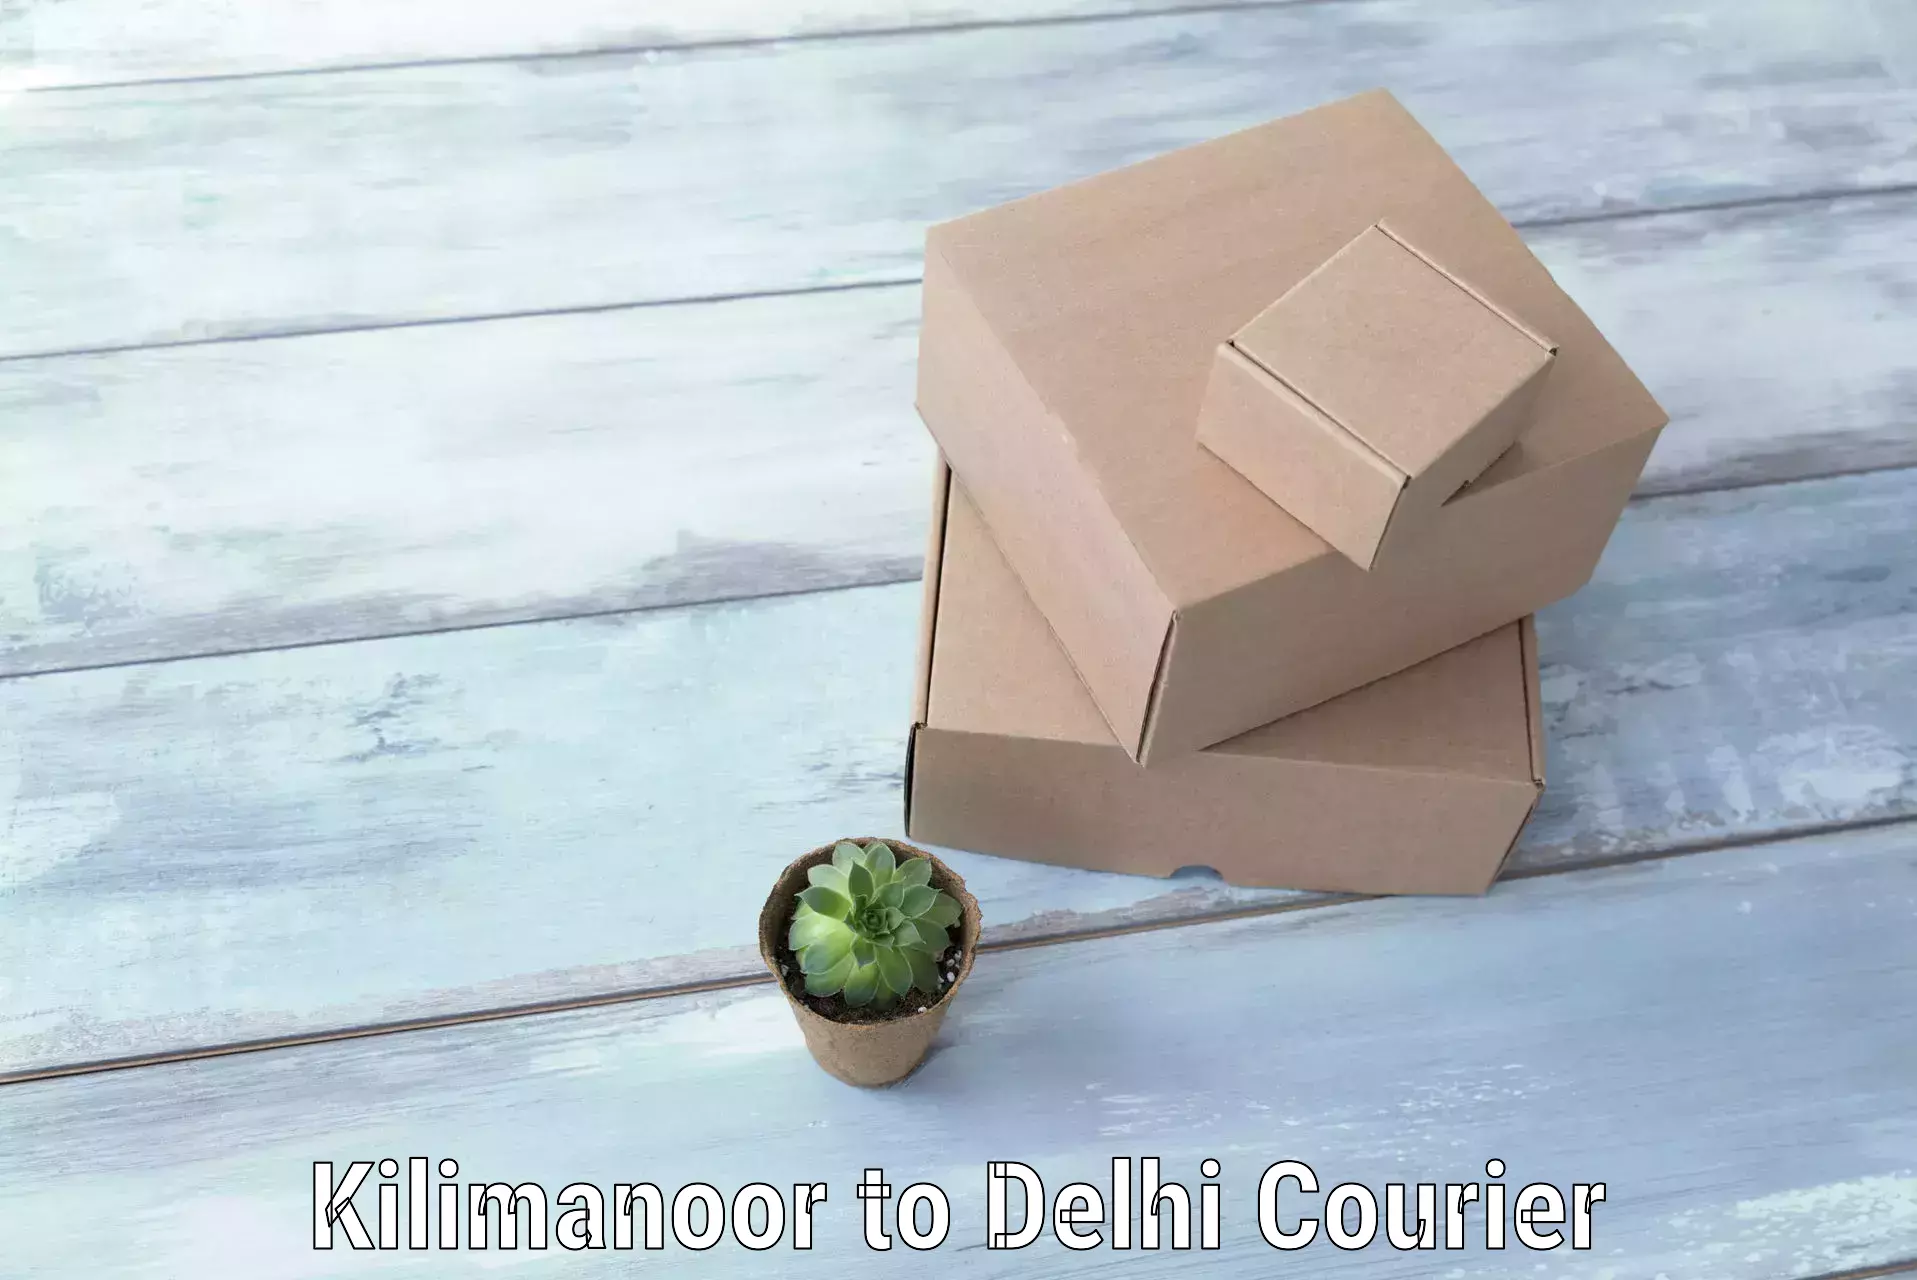 Personal effects shipping Kilimanoor to Delhi